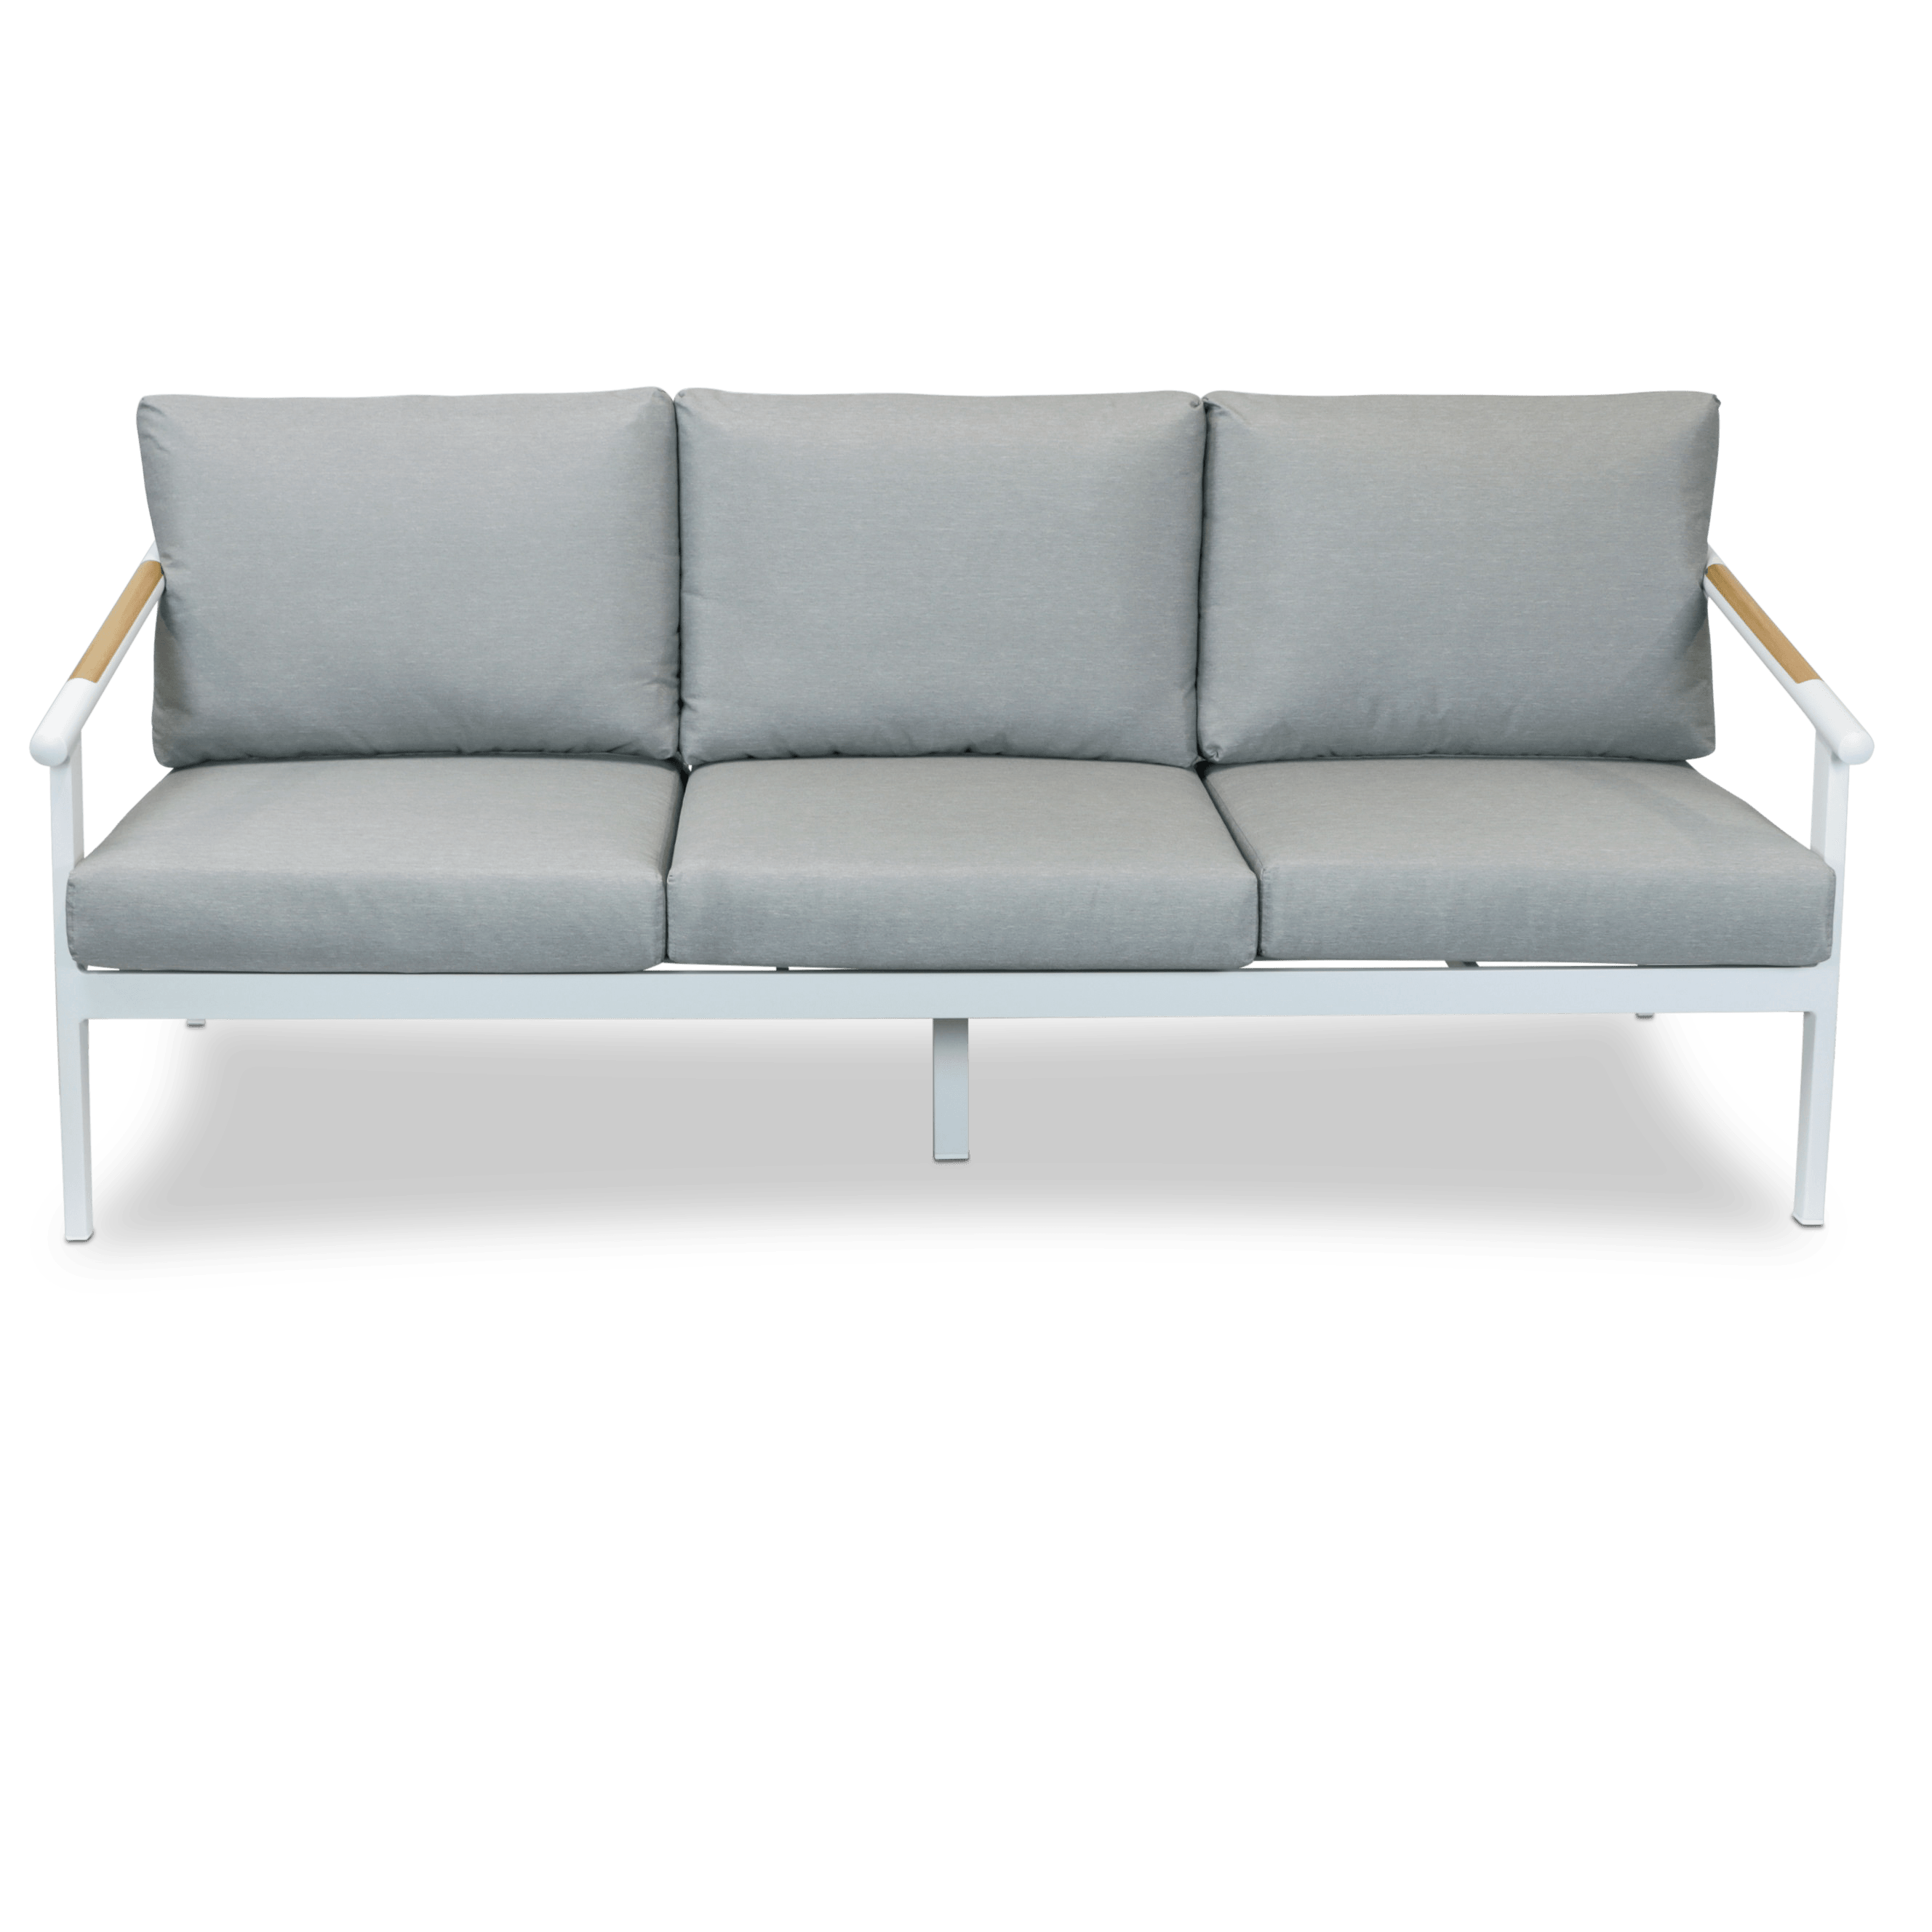 Porto 3 Seater in Arctic White Aluminium Frame with Teak Polywood Accent and Spuncrylic Stone Grey Cushions - The Furniture Shack